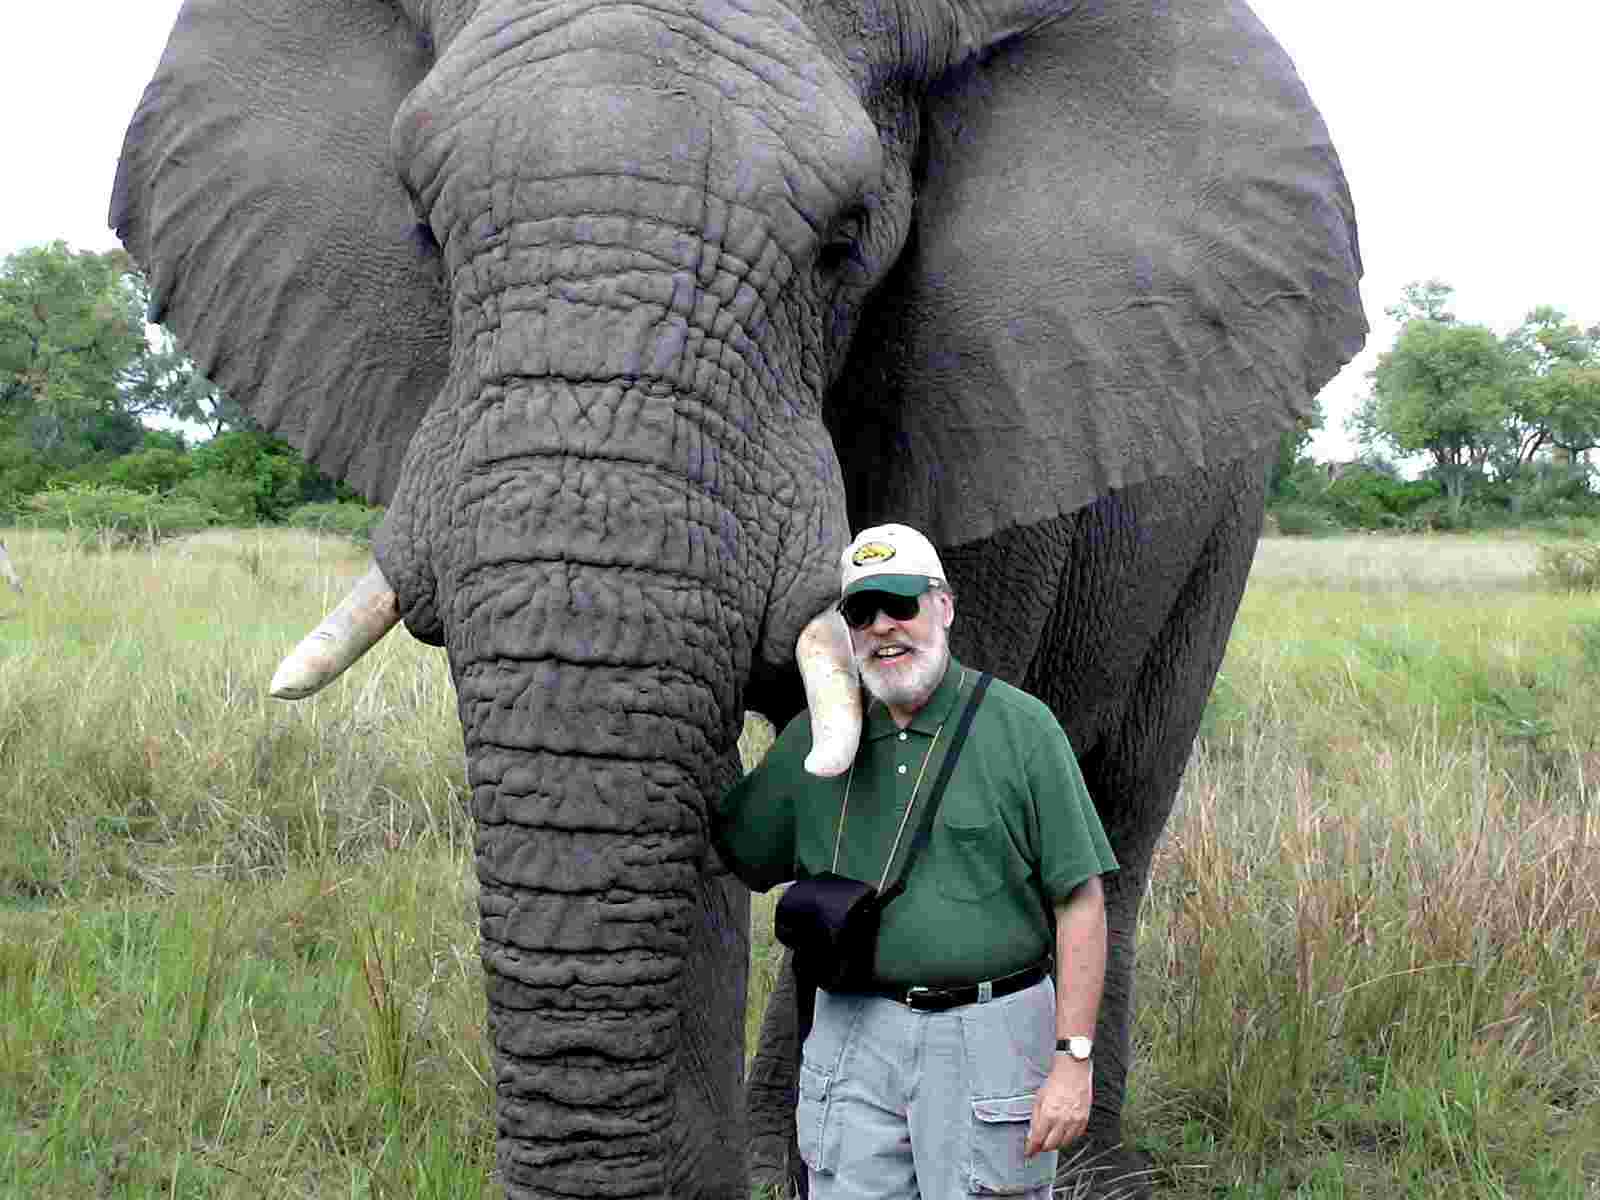 Jim poses with an elephant